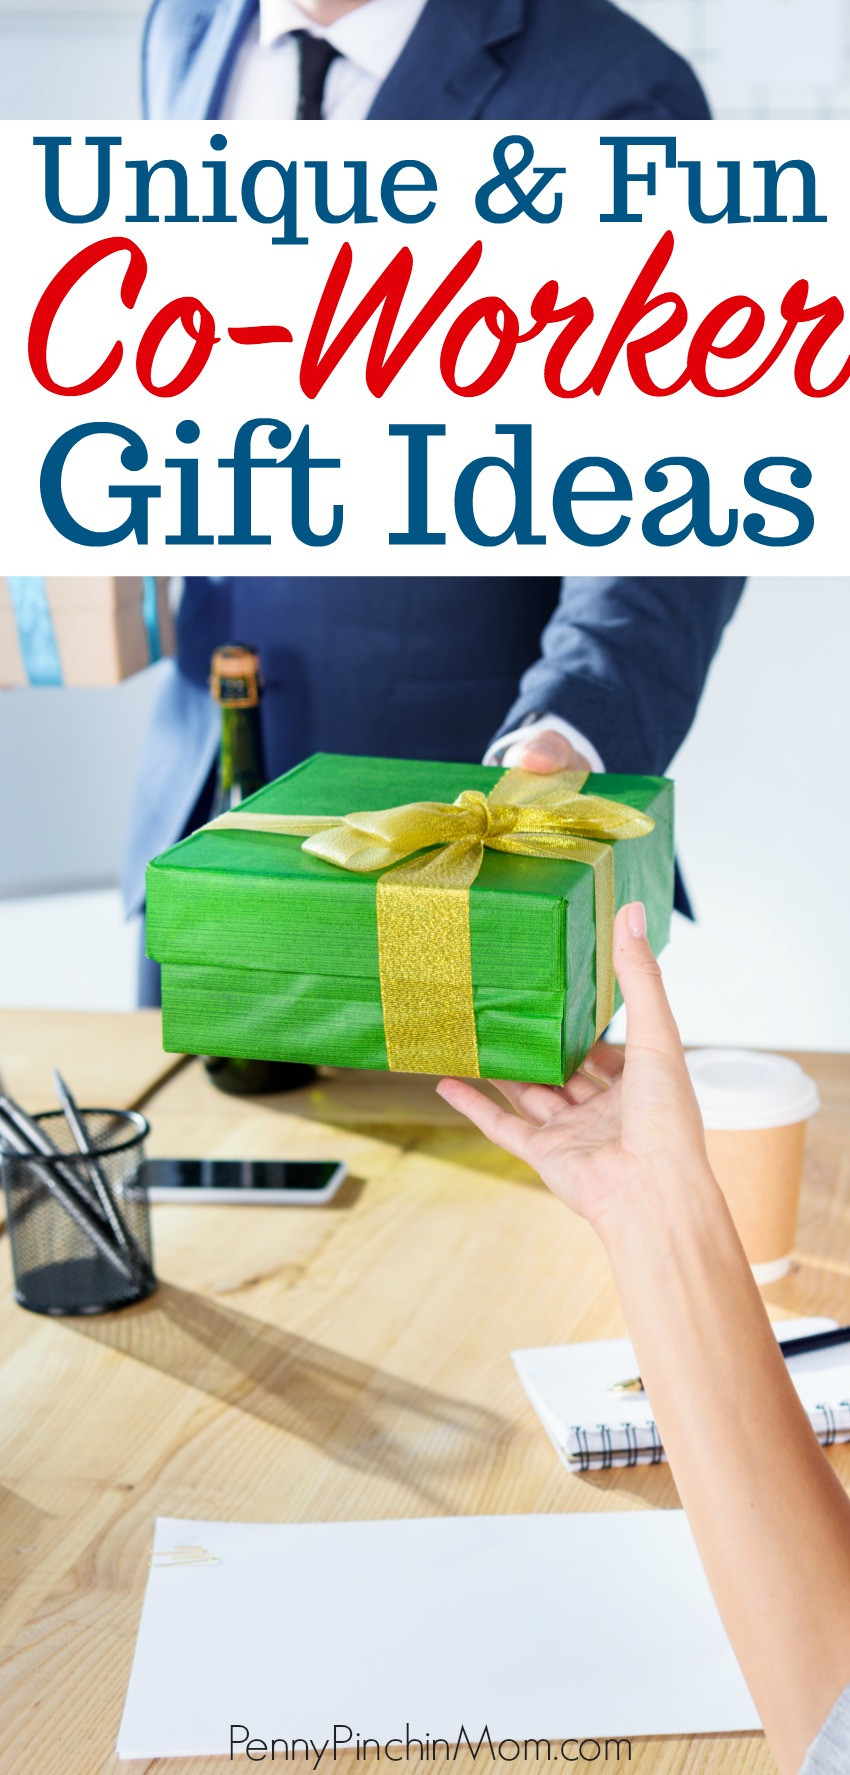 Employee Holiday Gift Ideas
 Co Worker Gift Ideas for Anyone on Your List This Year